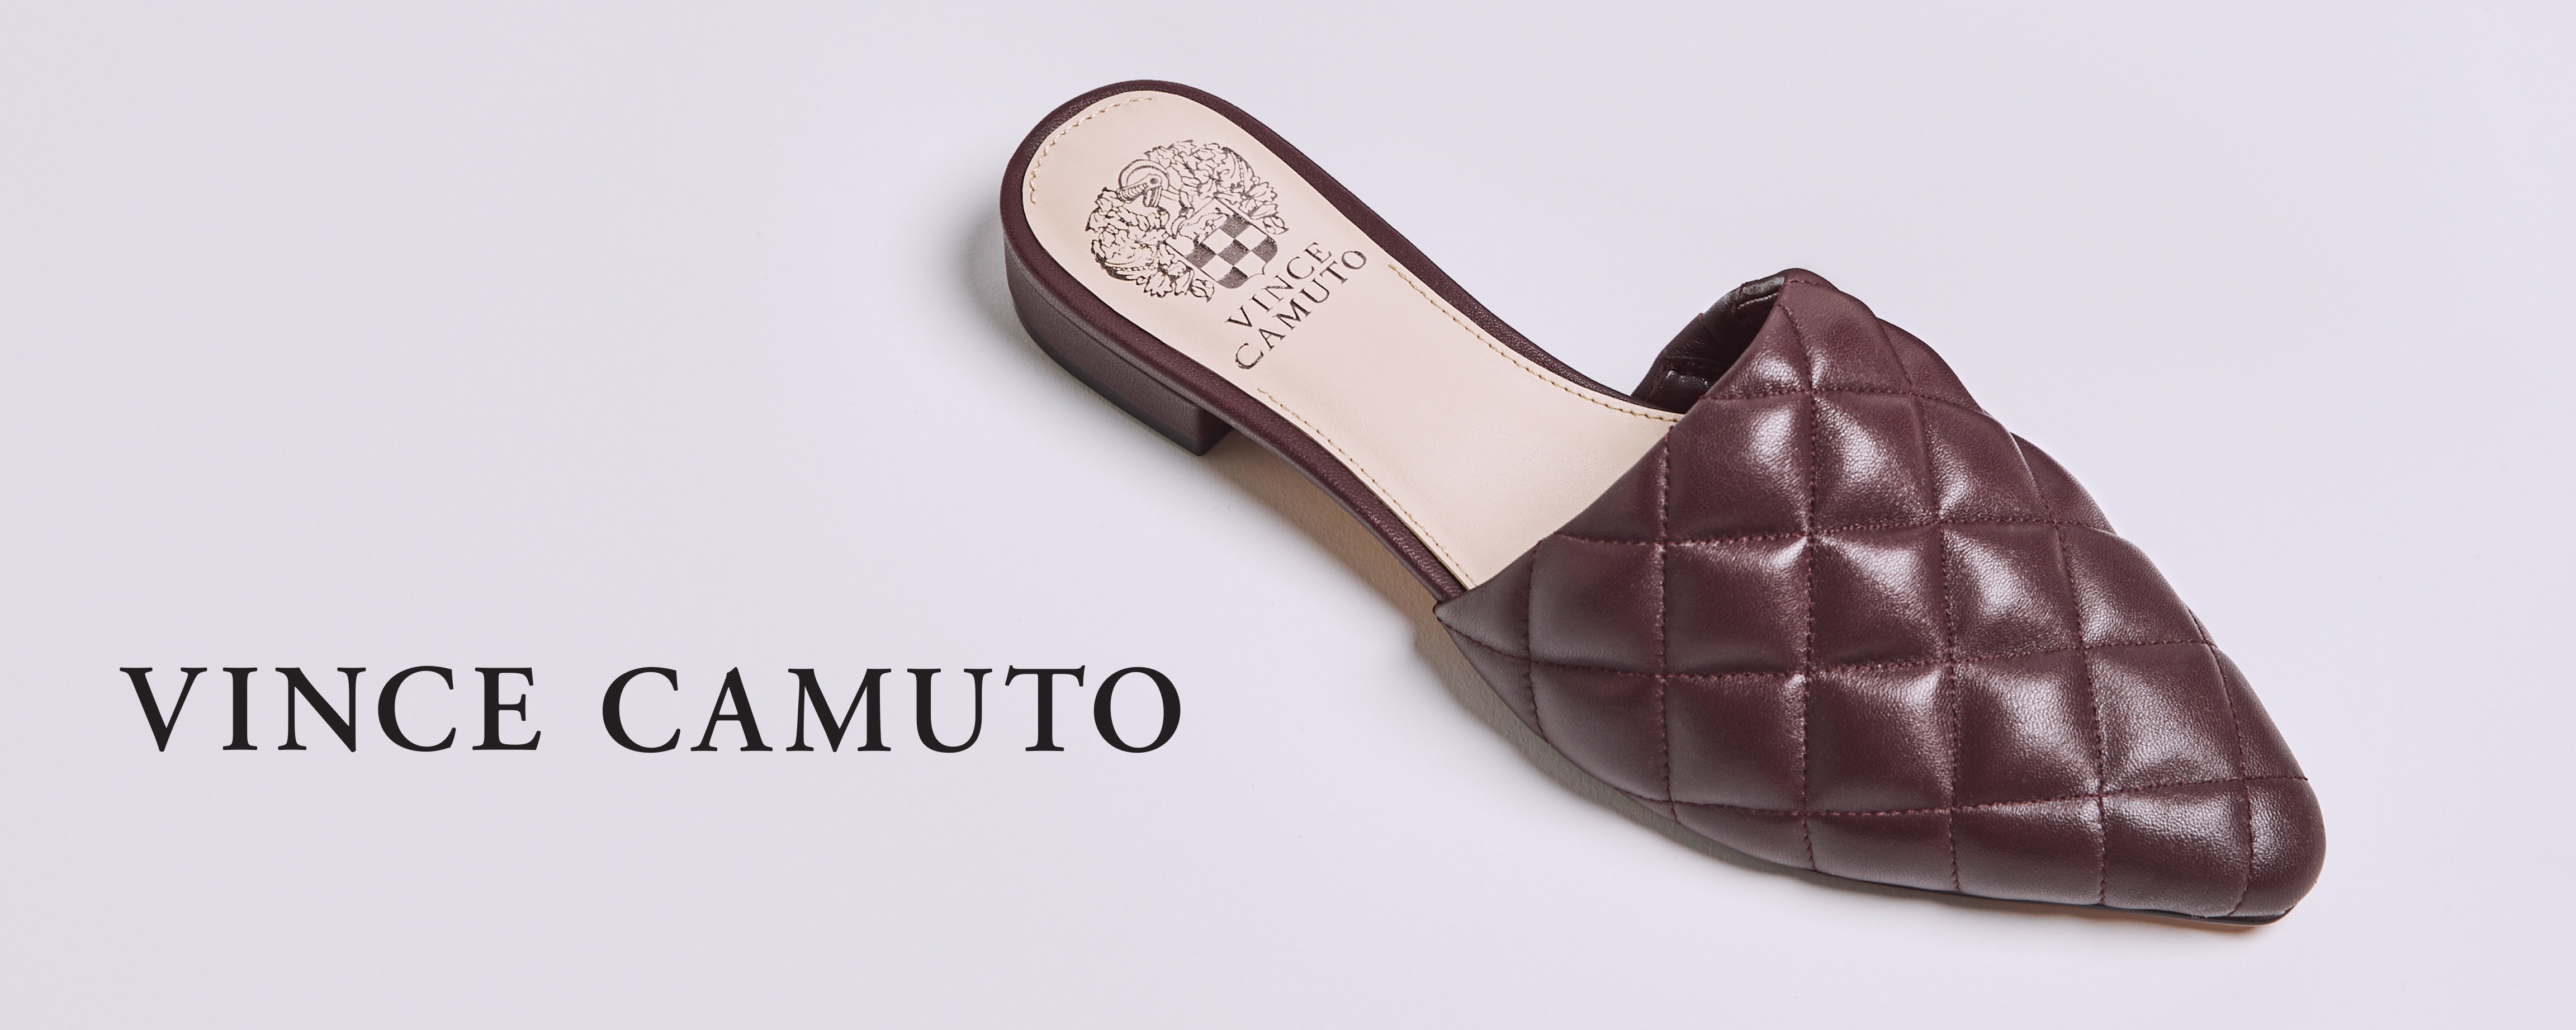 vince camuto leather shoes